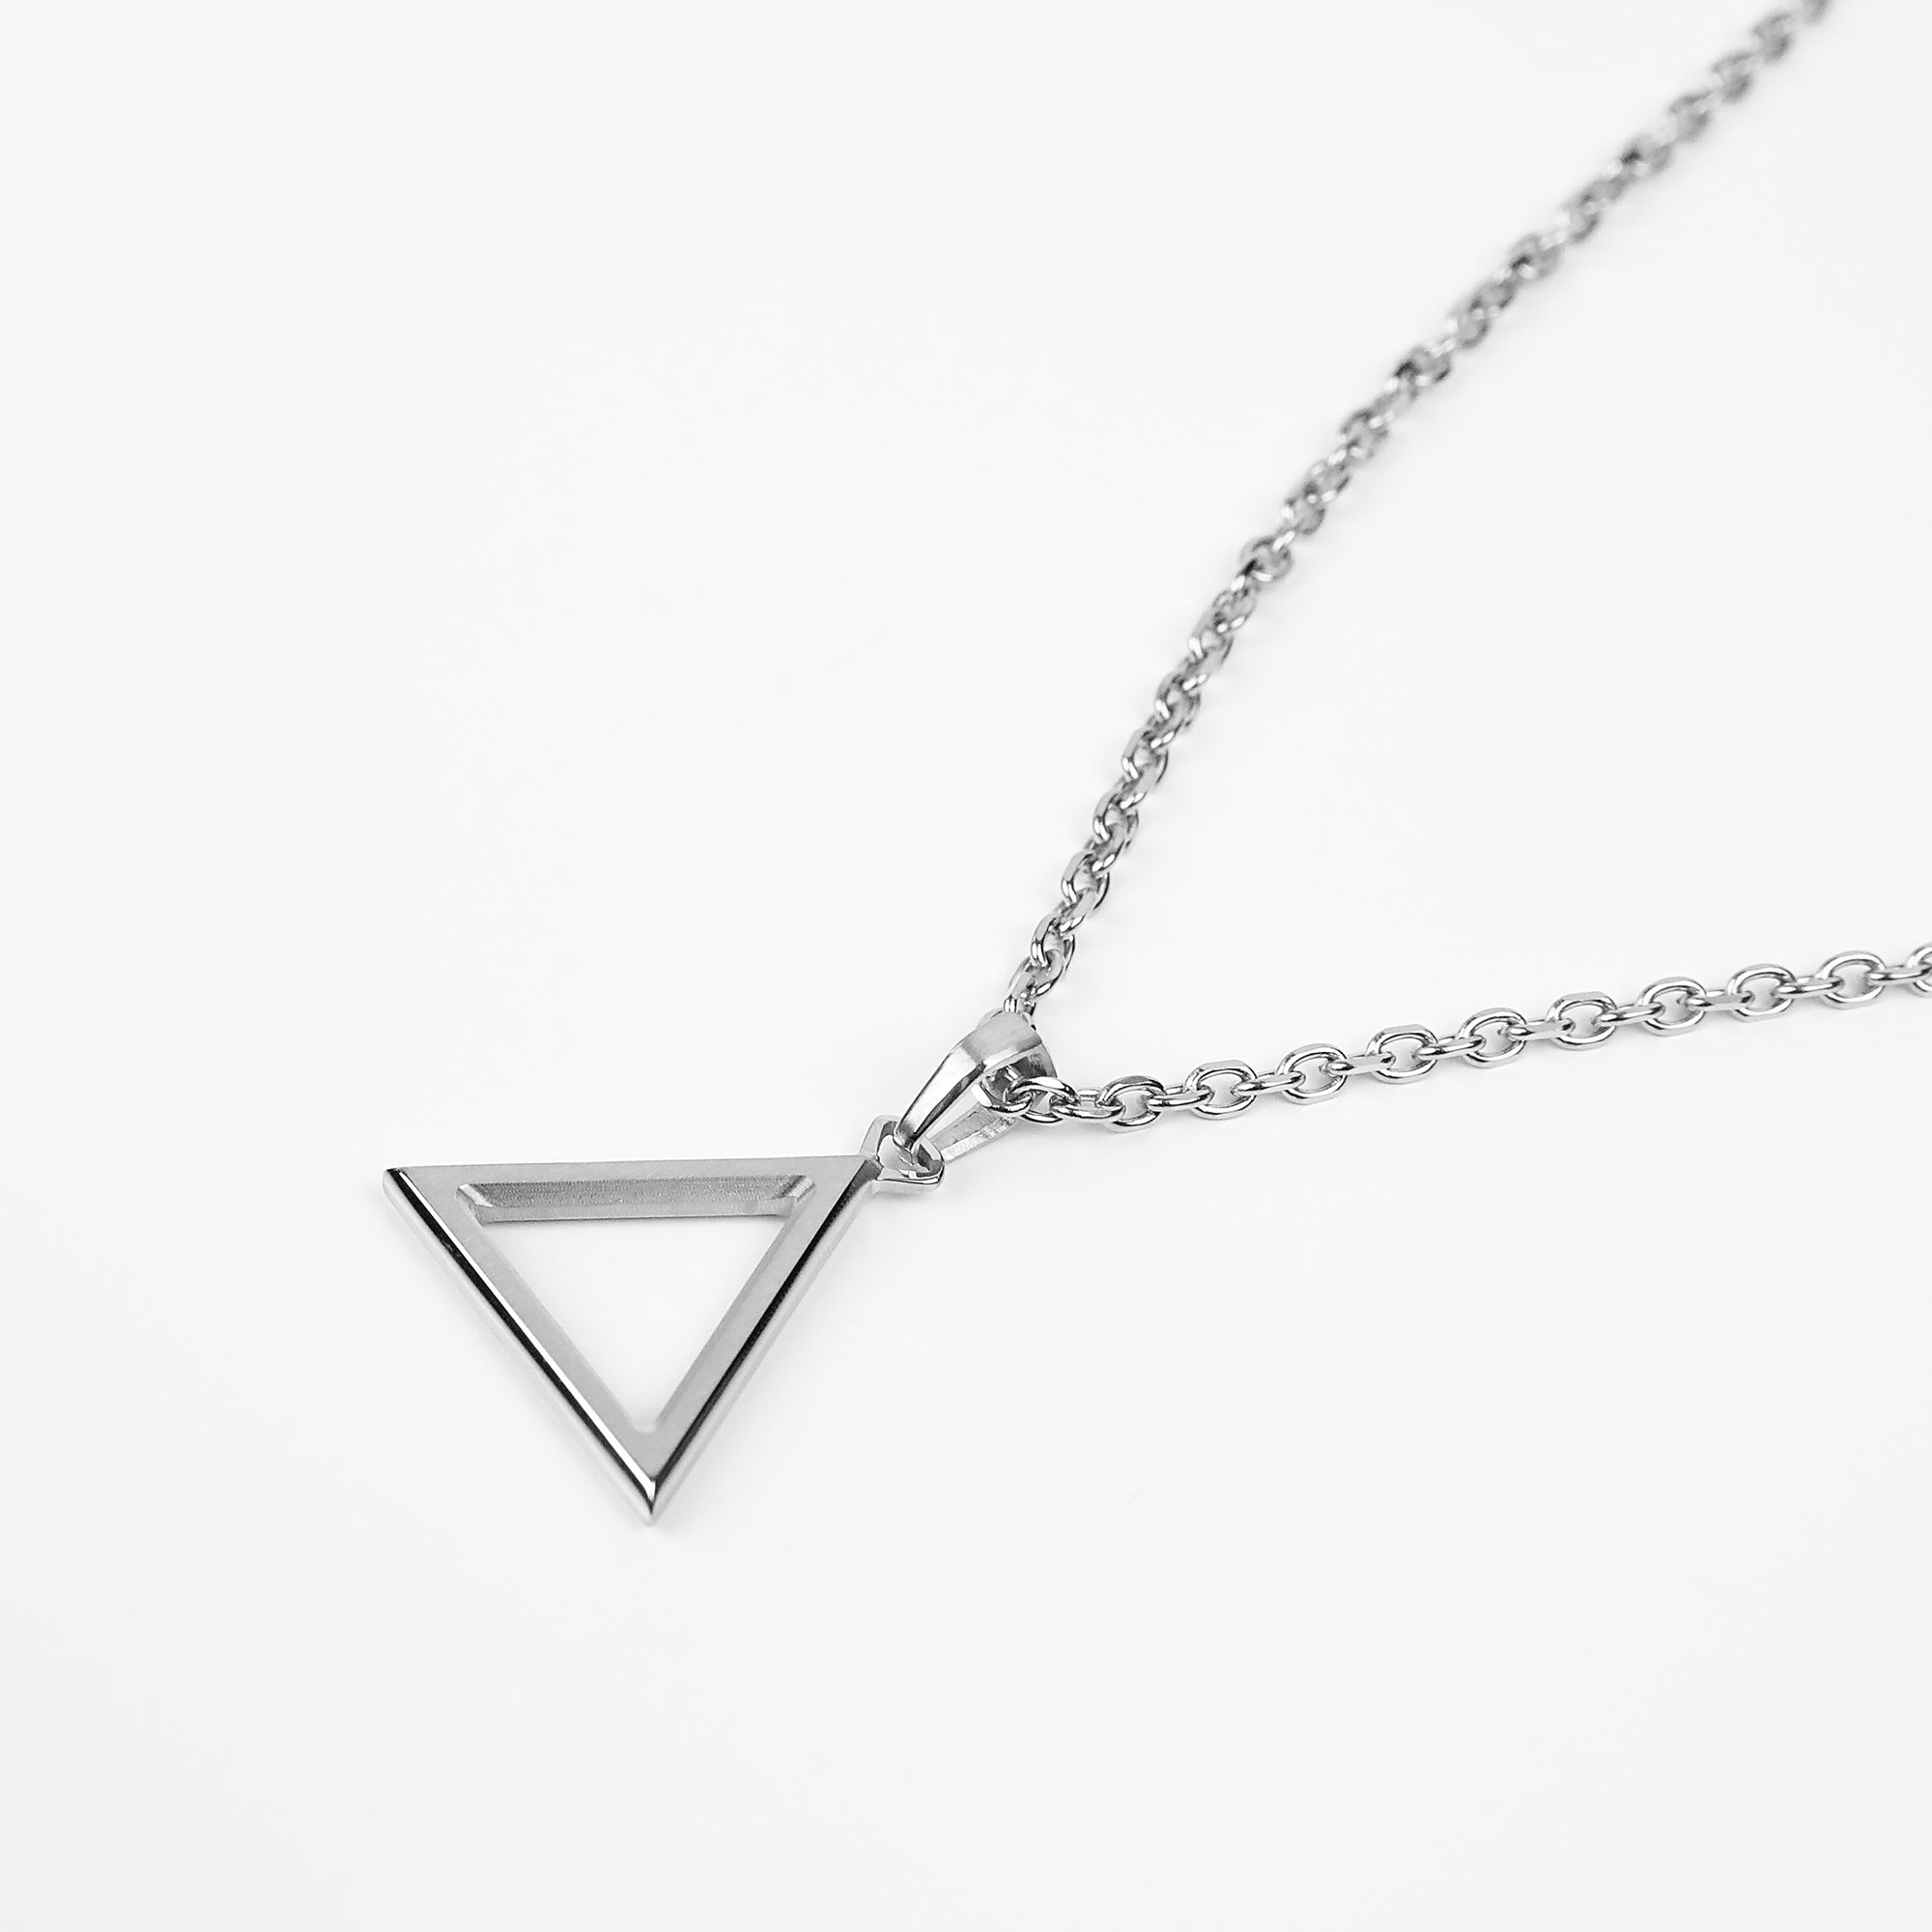 Nomad Triangle Necklace - Silver